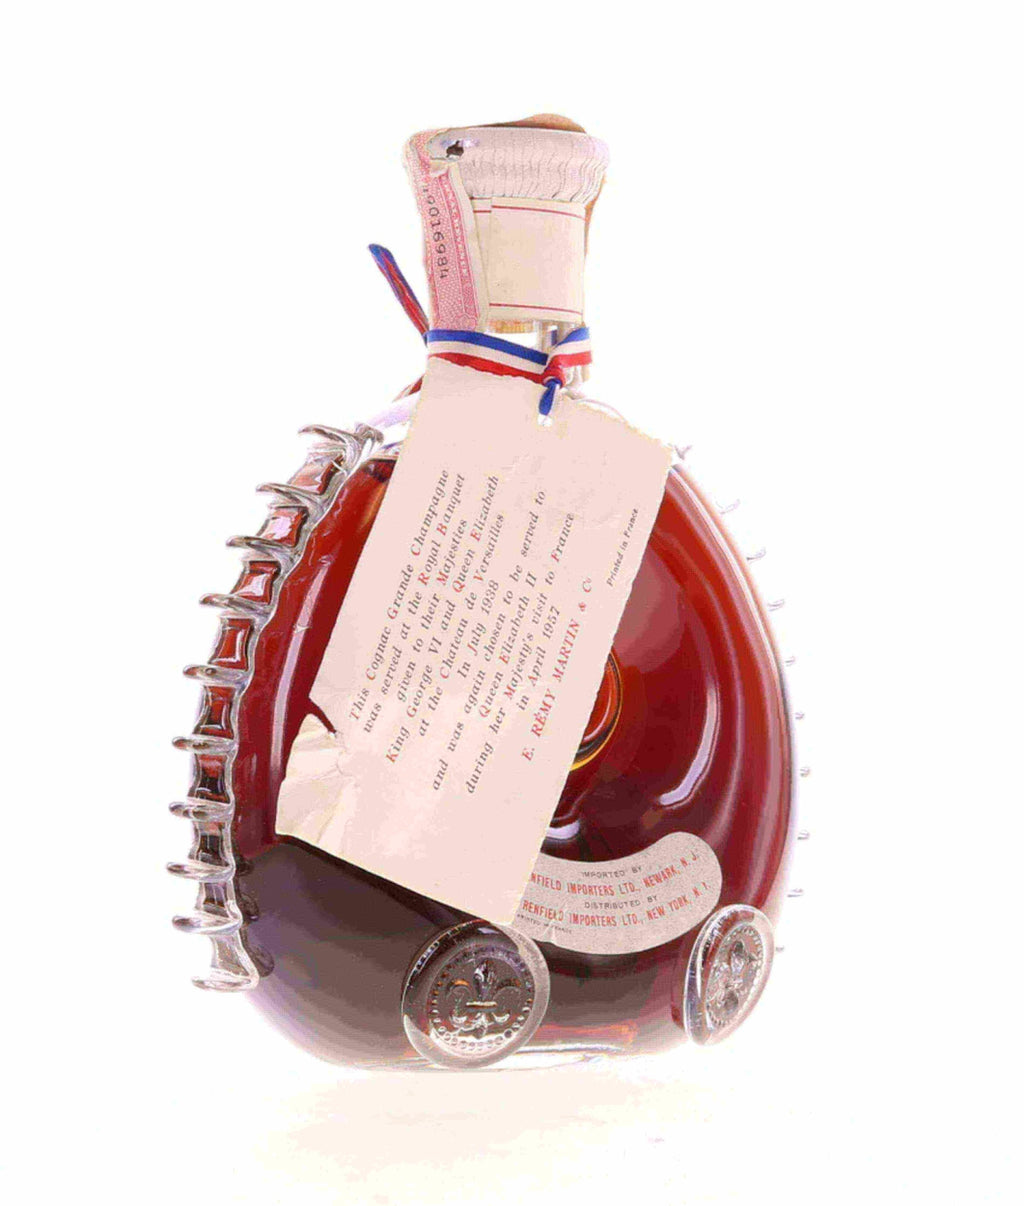 Remy Martin King Louis XIII 750 ML - Old Town Tequila